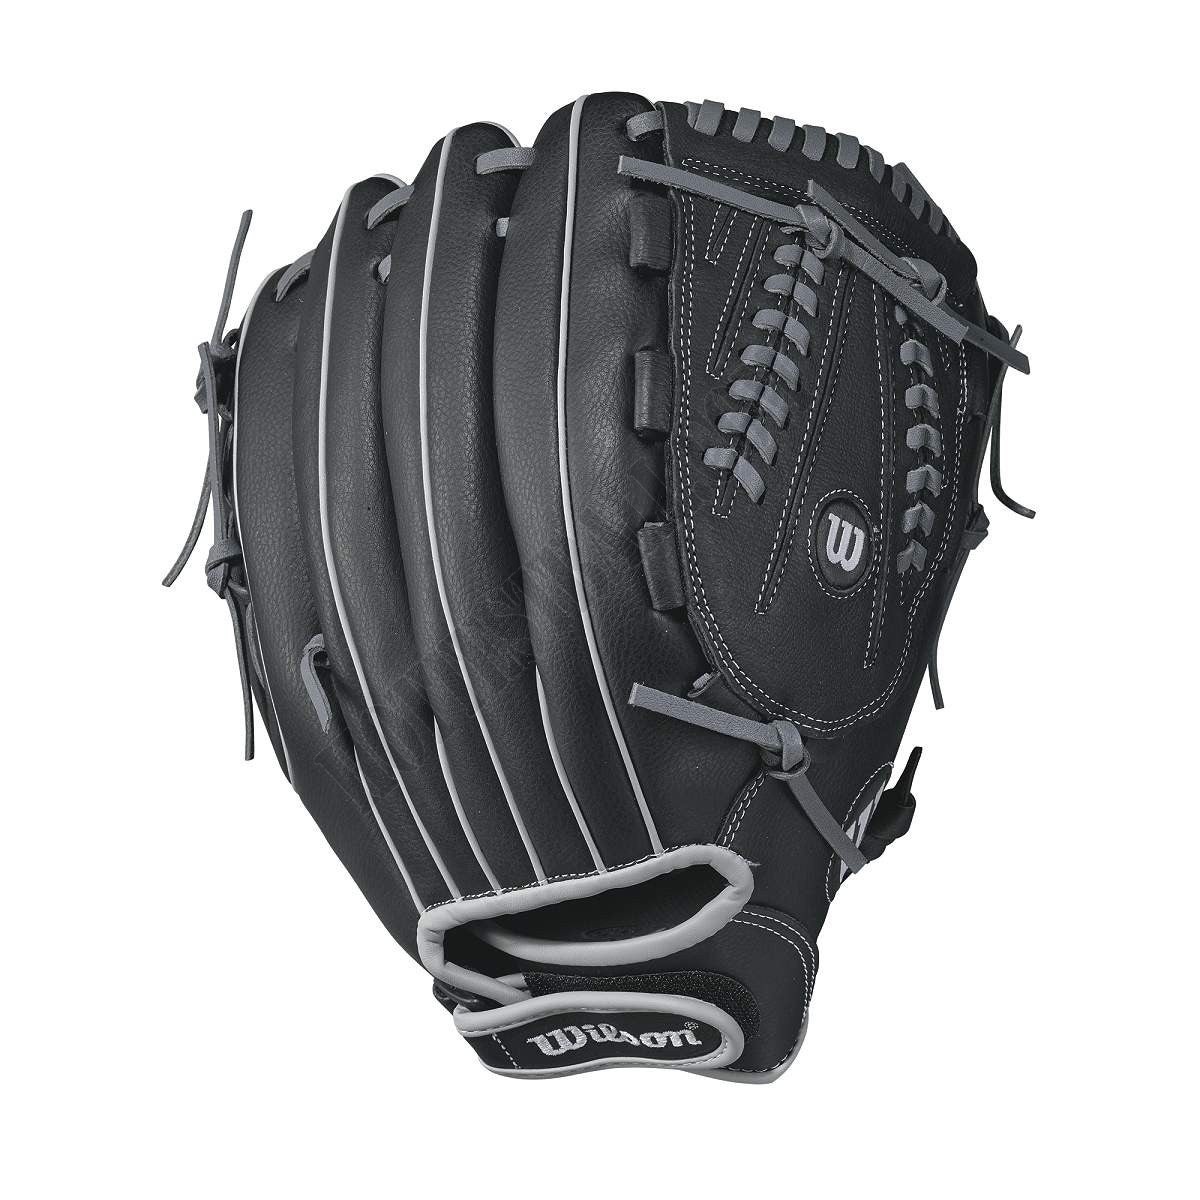 A360 13" Slowpitch Glove - Right Hand Throw ● Wilson Promotions - -1